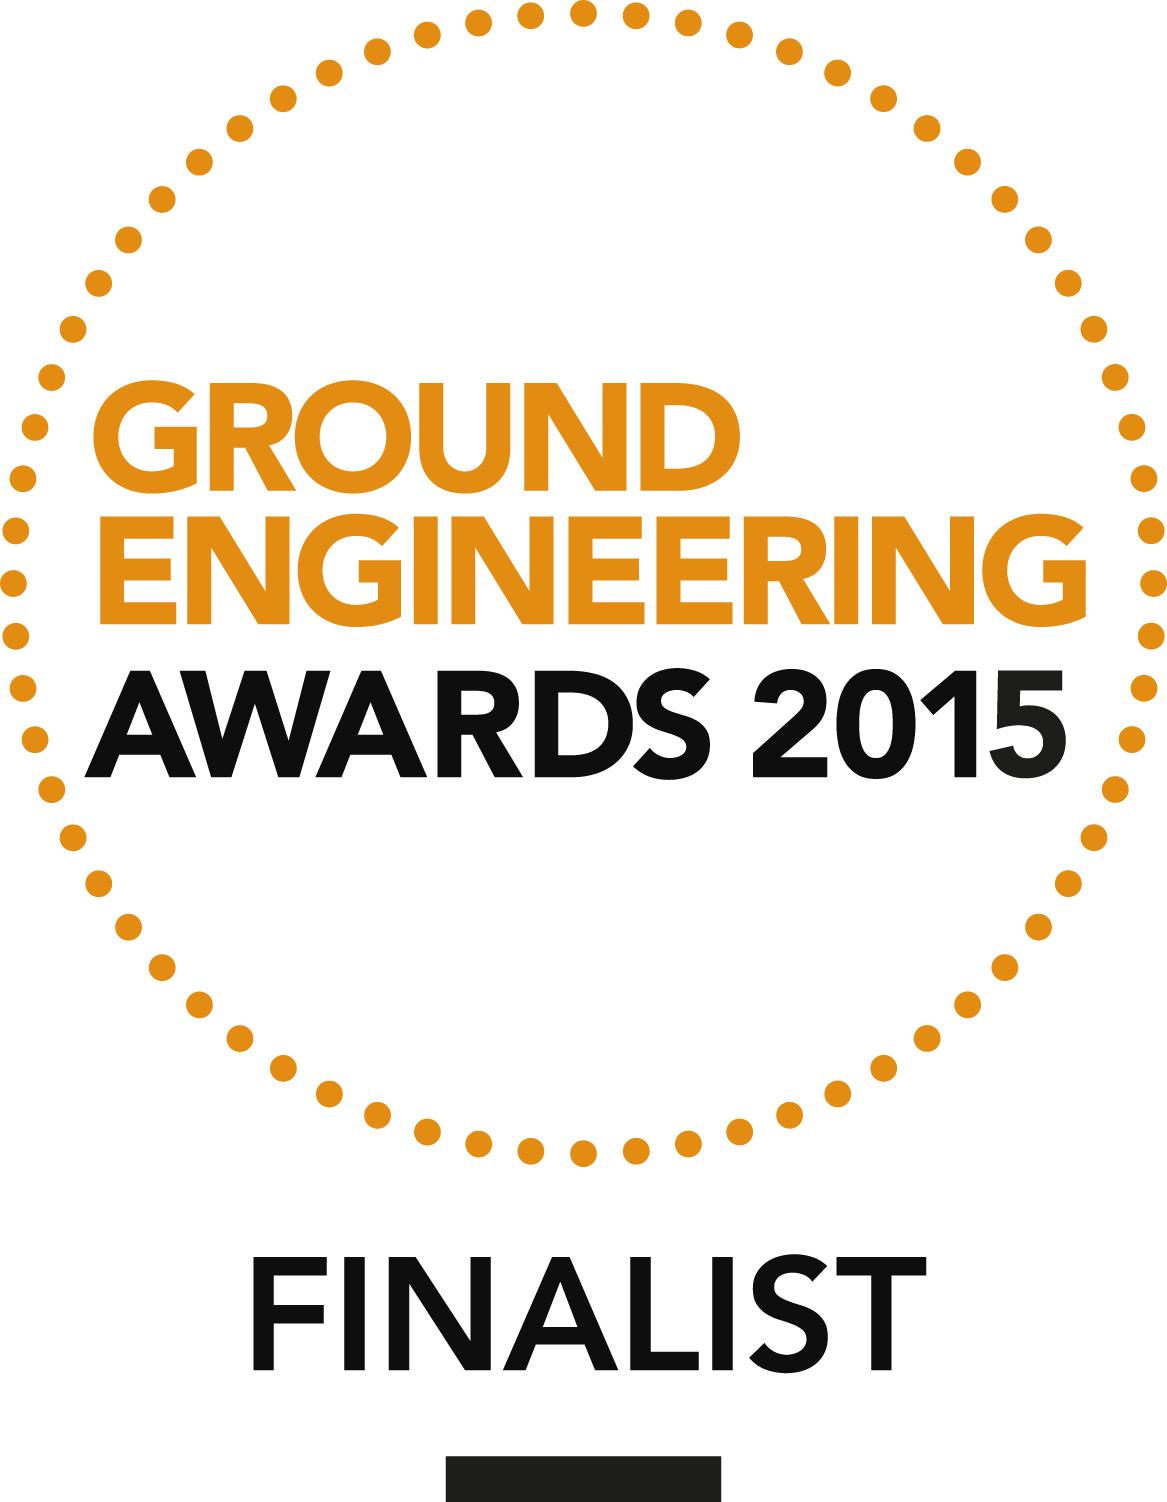 Six nominations for Ground Engineering Awards 2015